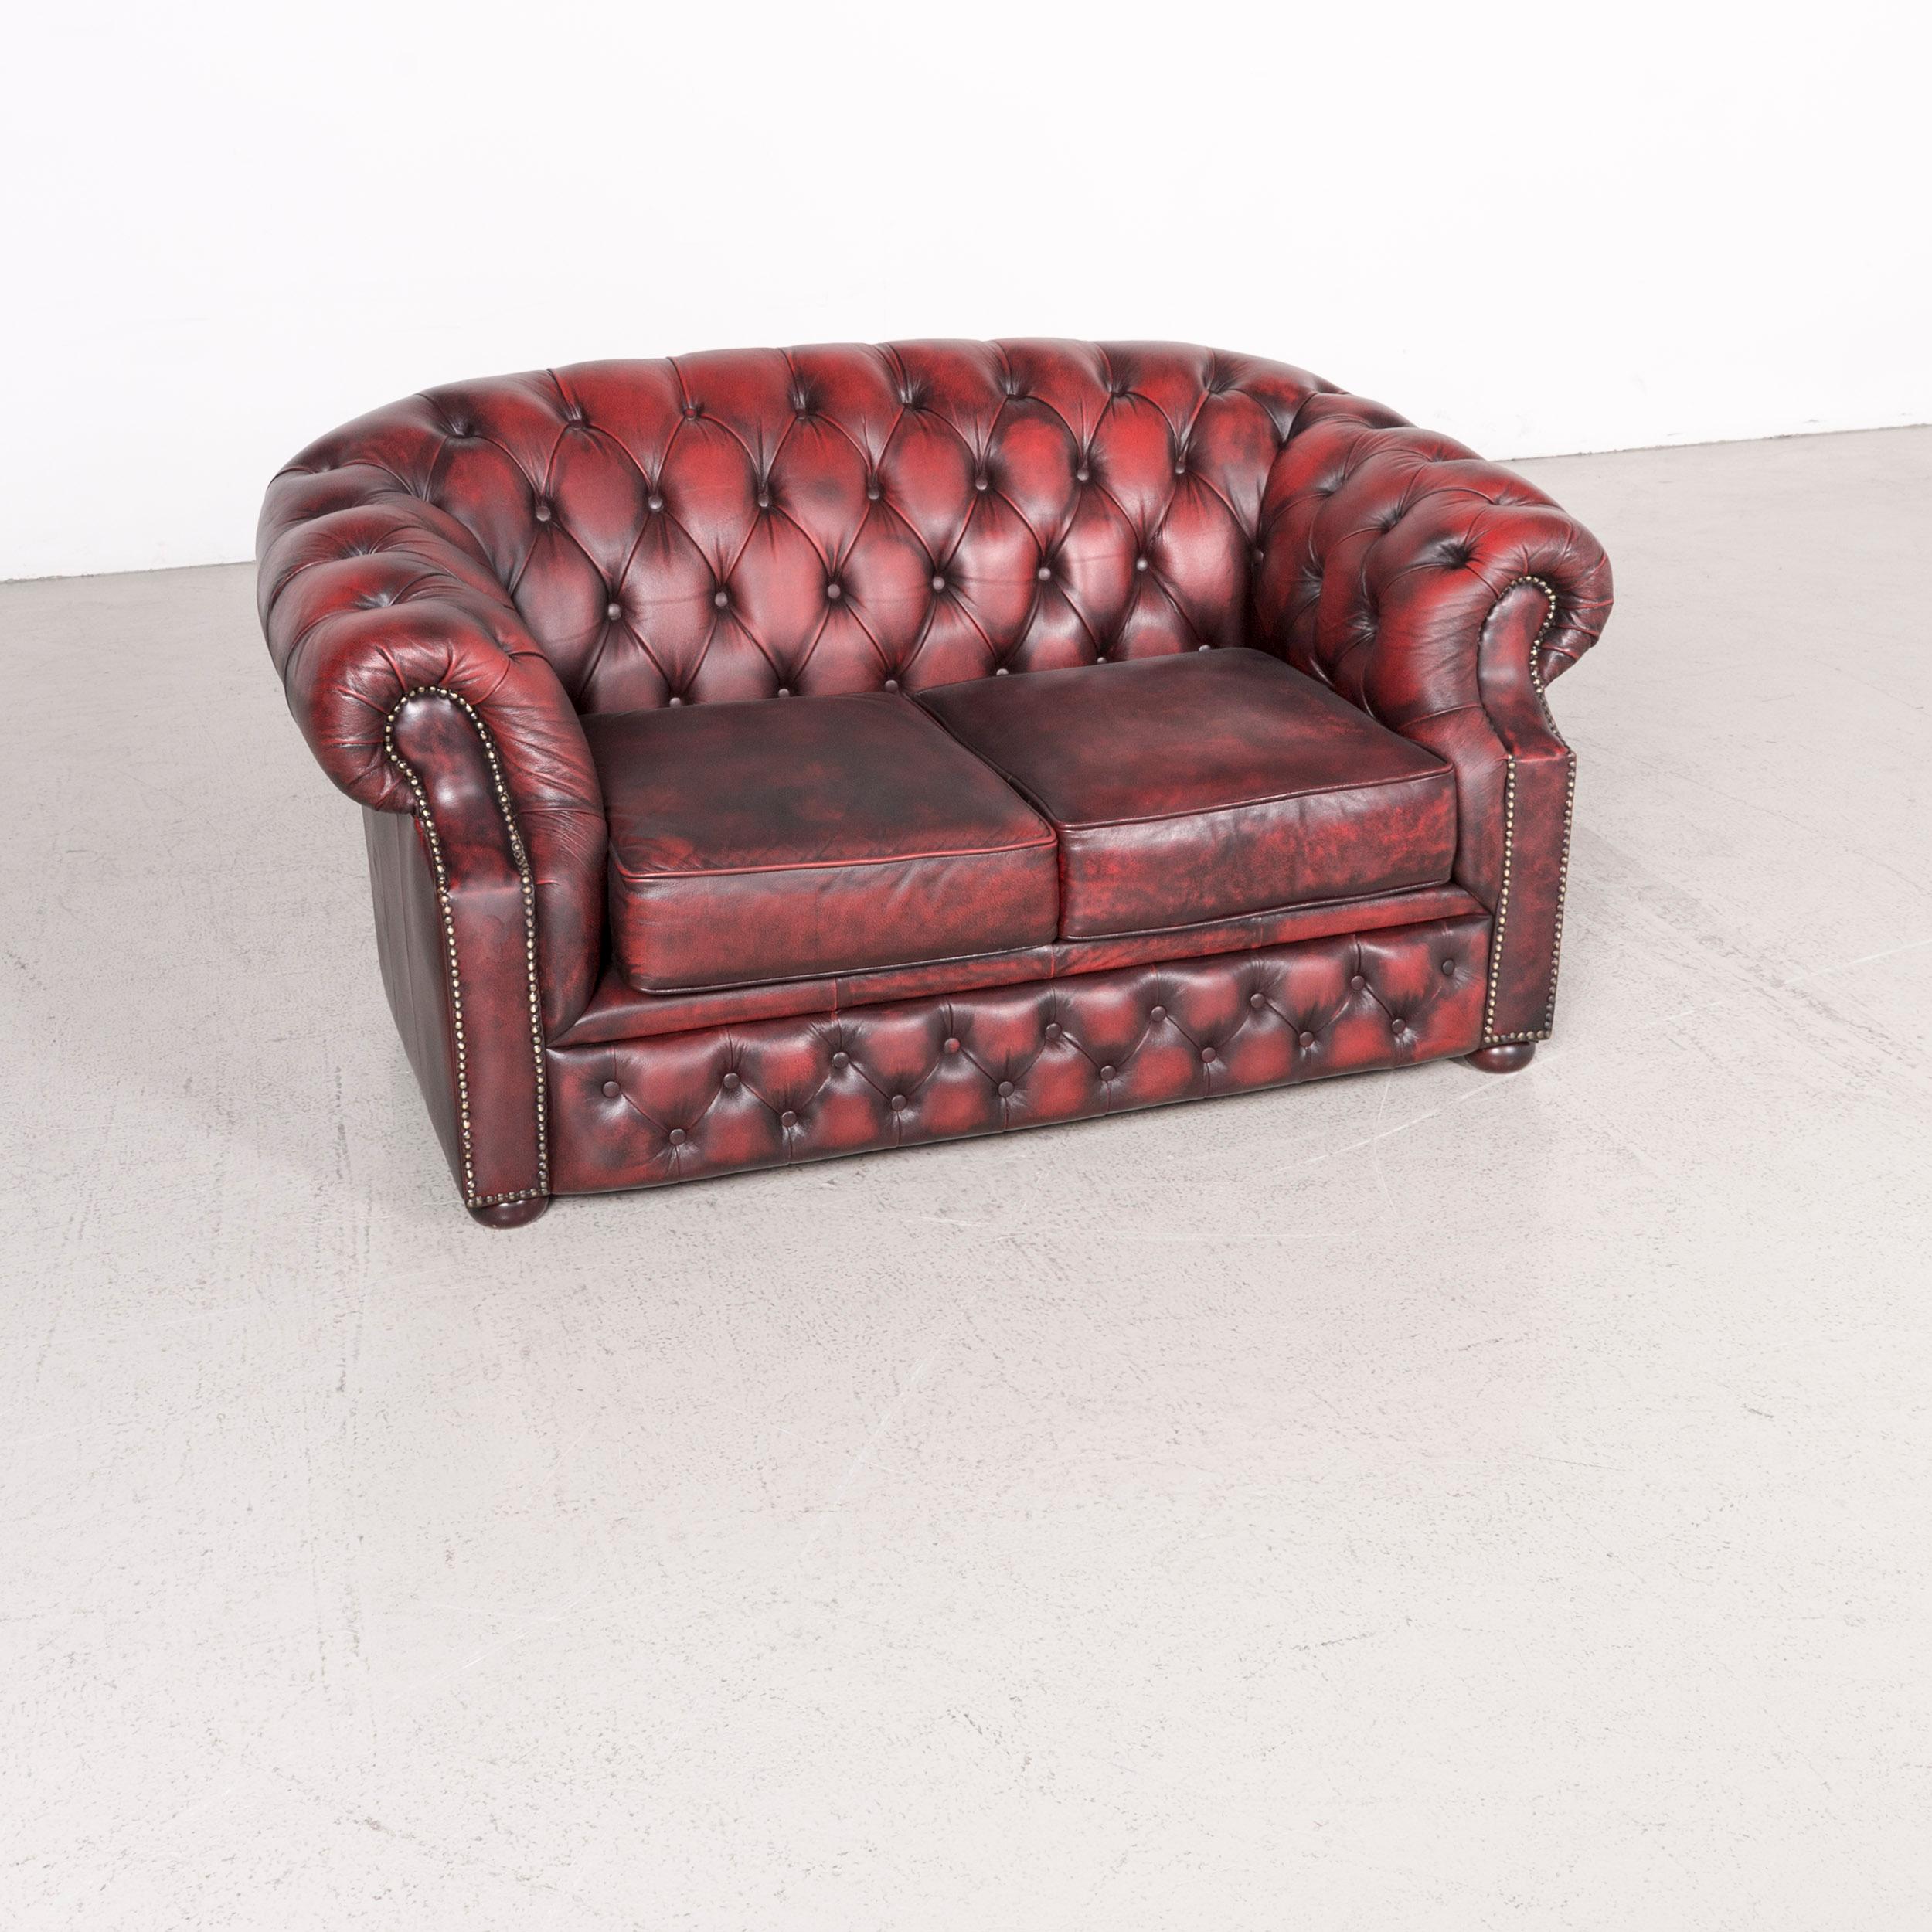 We bring to you a Chesterfield leather sofa red real leather two-seat couch vintage retro.
 

Product measures in centimeters:

Depth: 100
Width: 160
Height: 80
Seat-height: 40
Rest-height: 70
Seat-depth: 55
Seat-width: 95
Back-height: